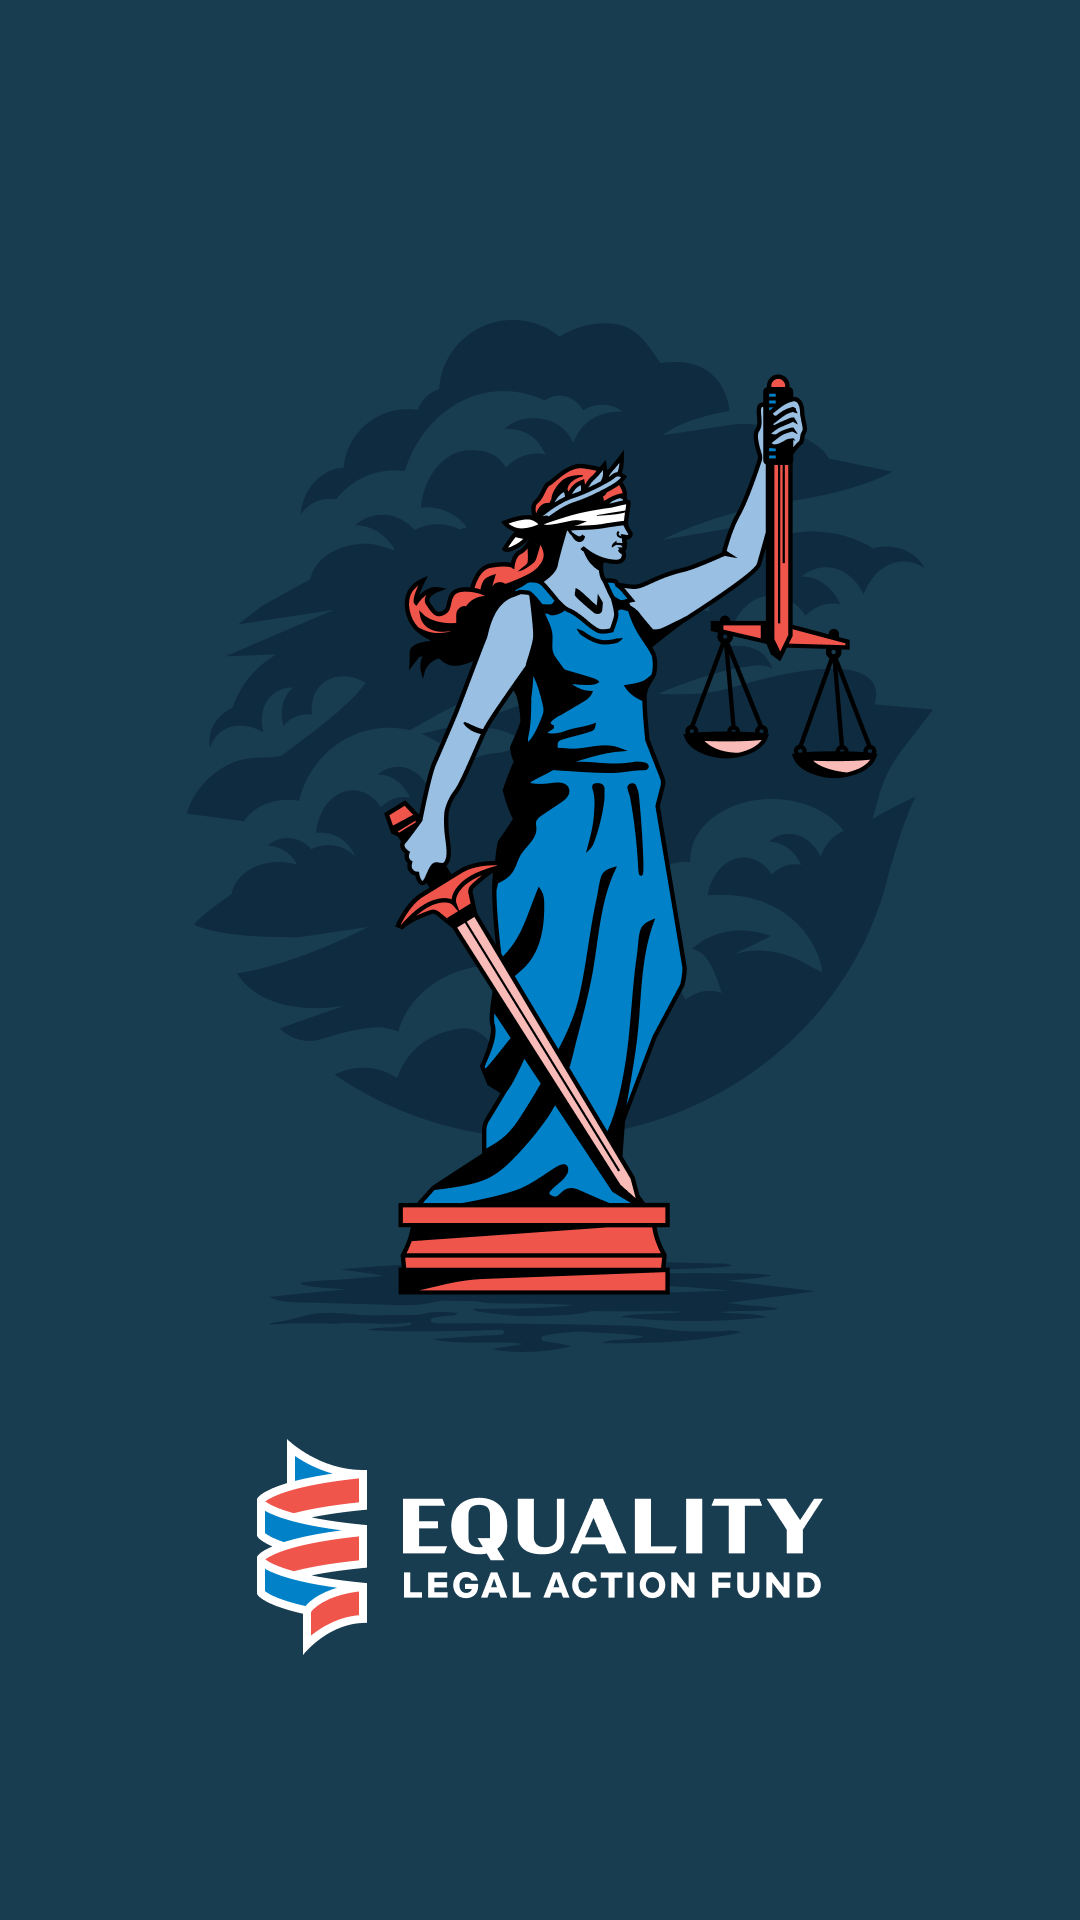 EqualityLAF-Story-LadyJustice-Navy.png